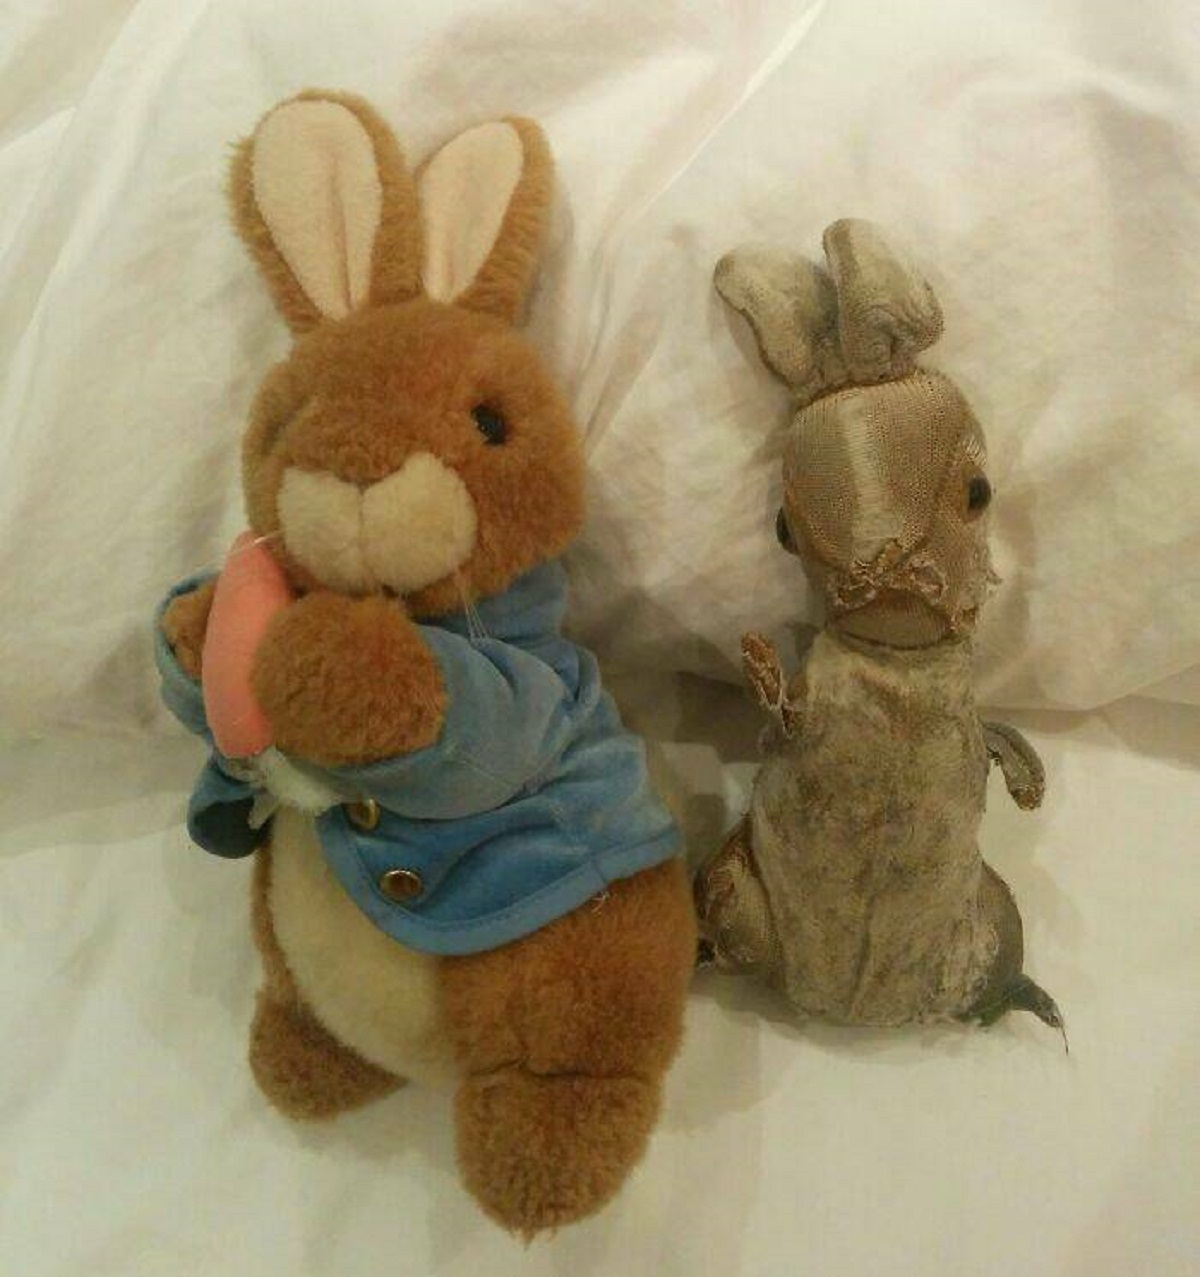 "23 Years Ago, My Girlfriend Was Given 2 Identical Stuffed Peter Rabbit Toys. One She Kept With Her At All Times (And Still Does), The Other Was Stored Away"